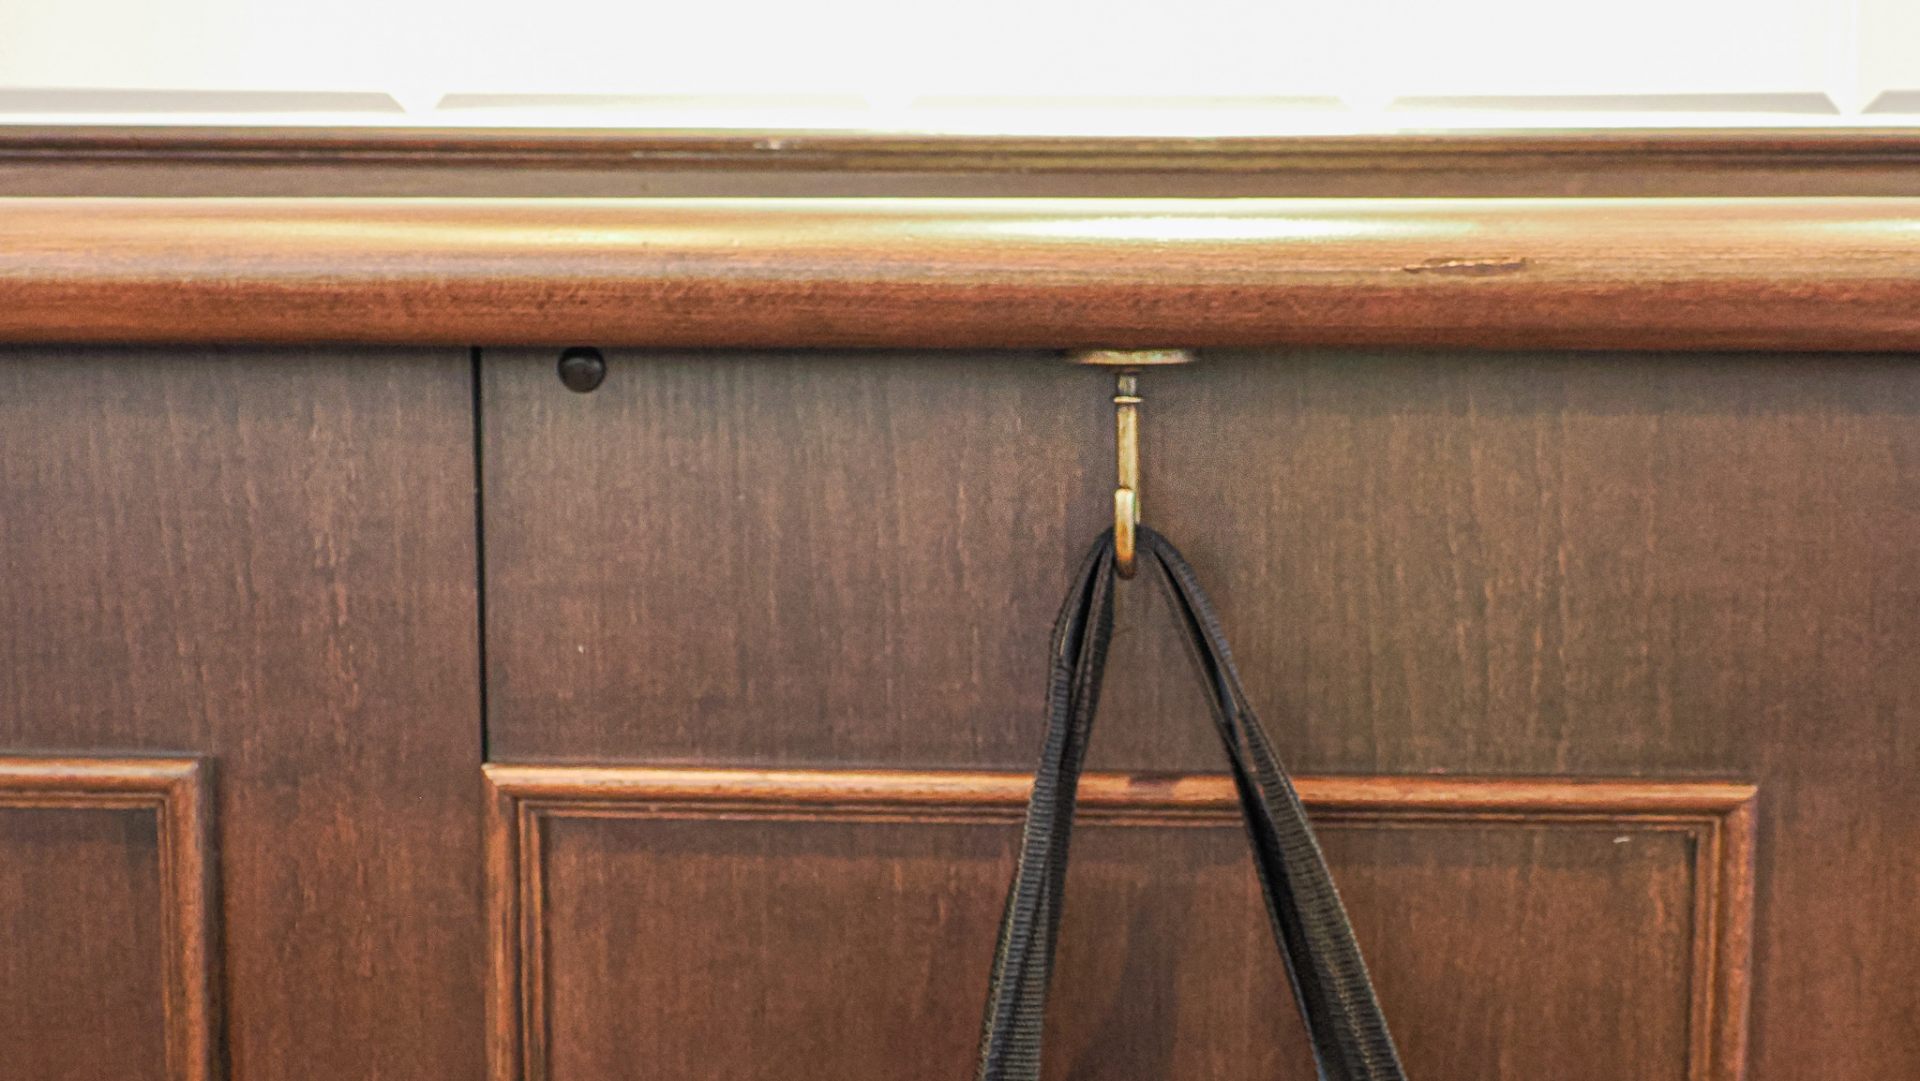 A bag hanger under the counter tables along the walls